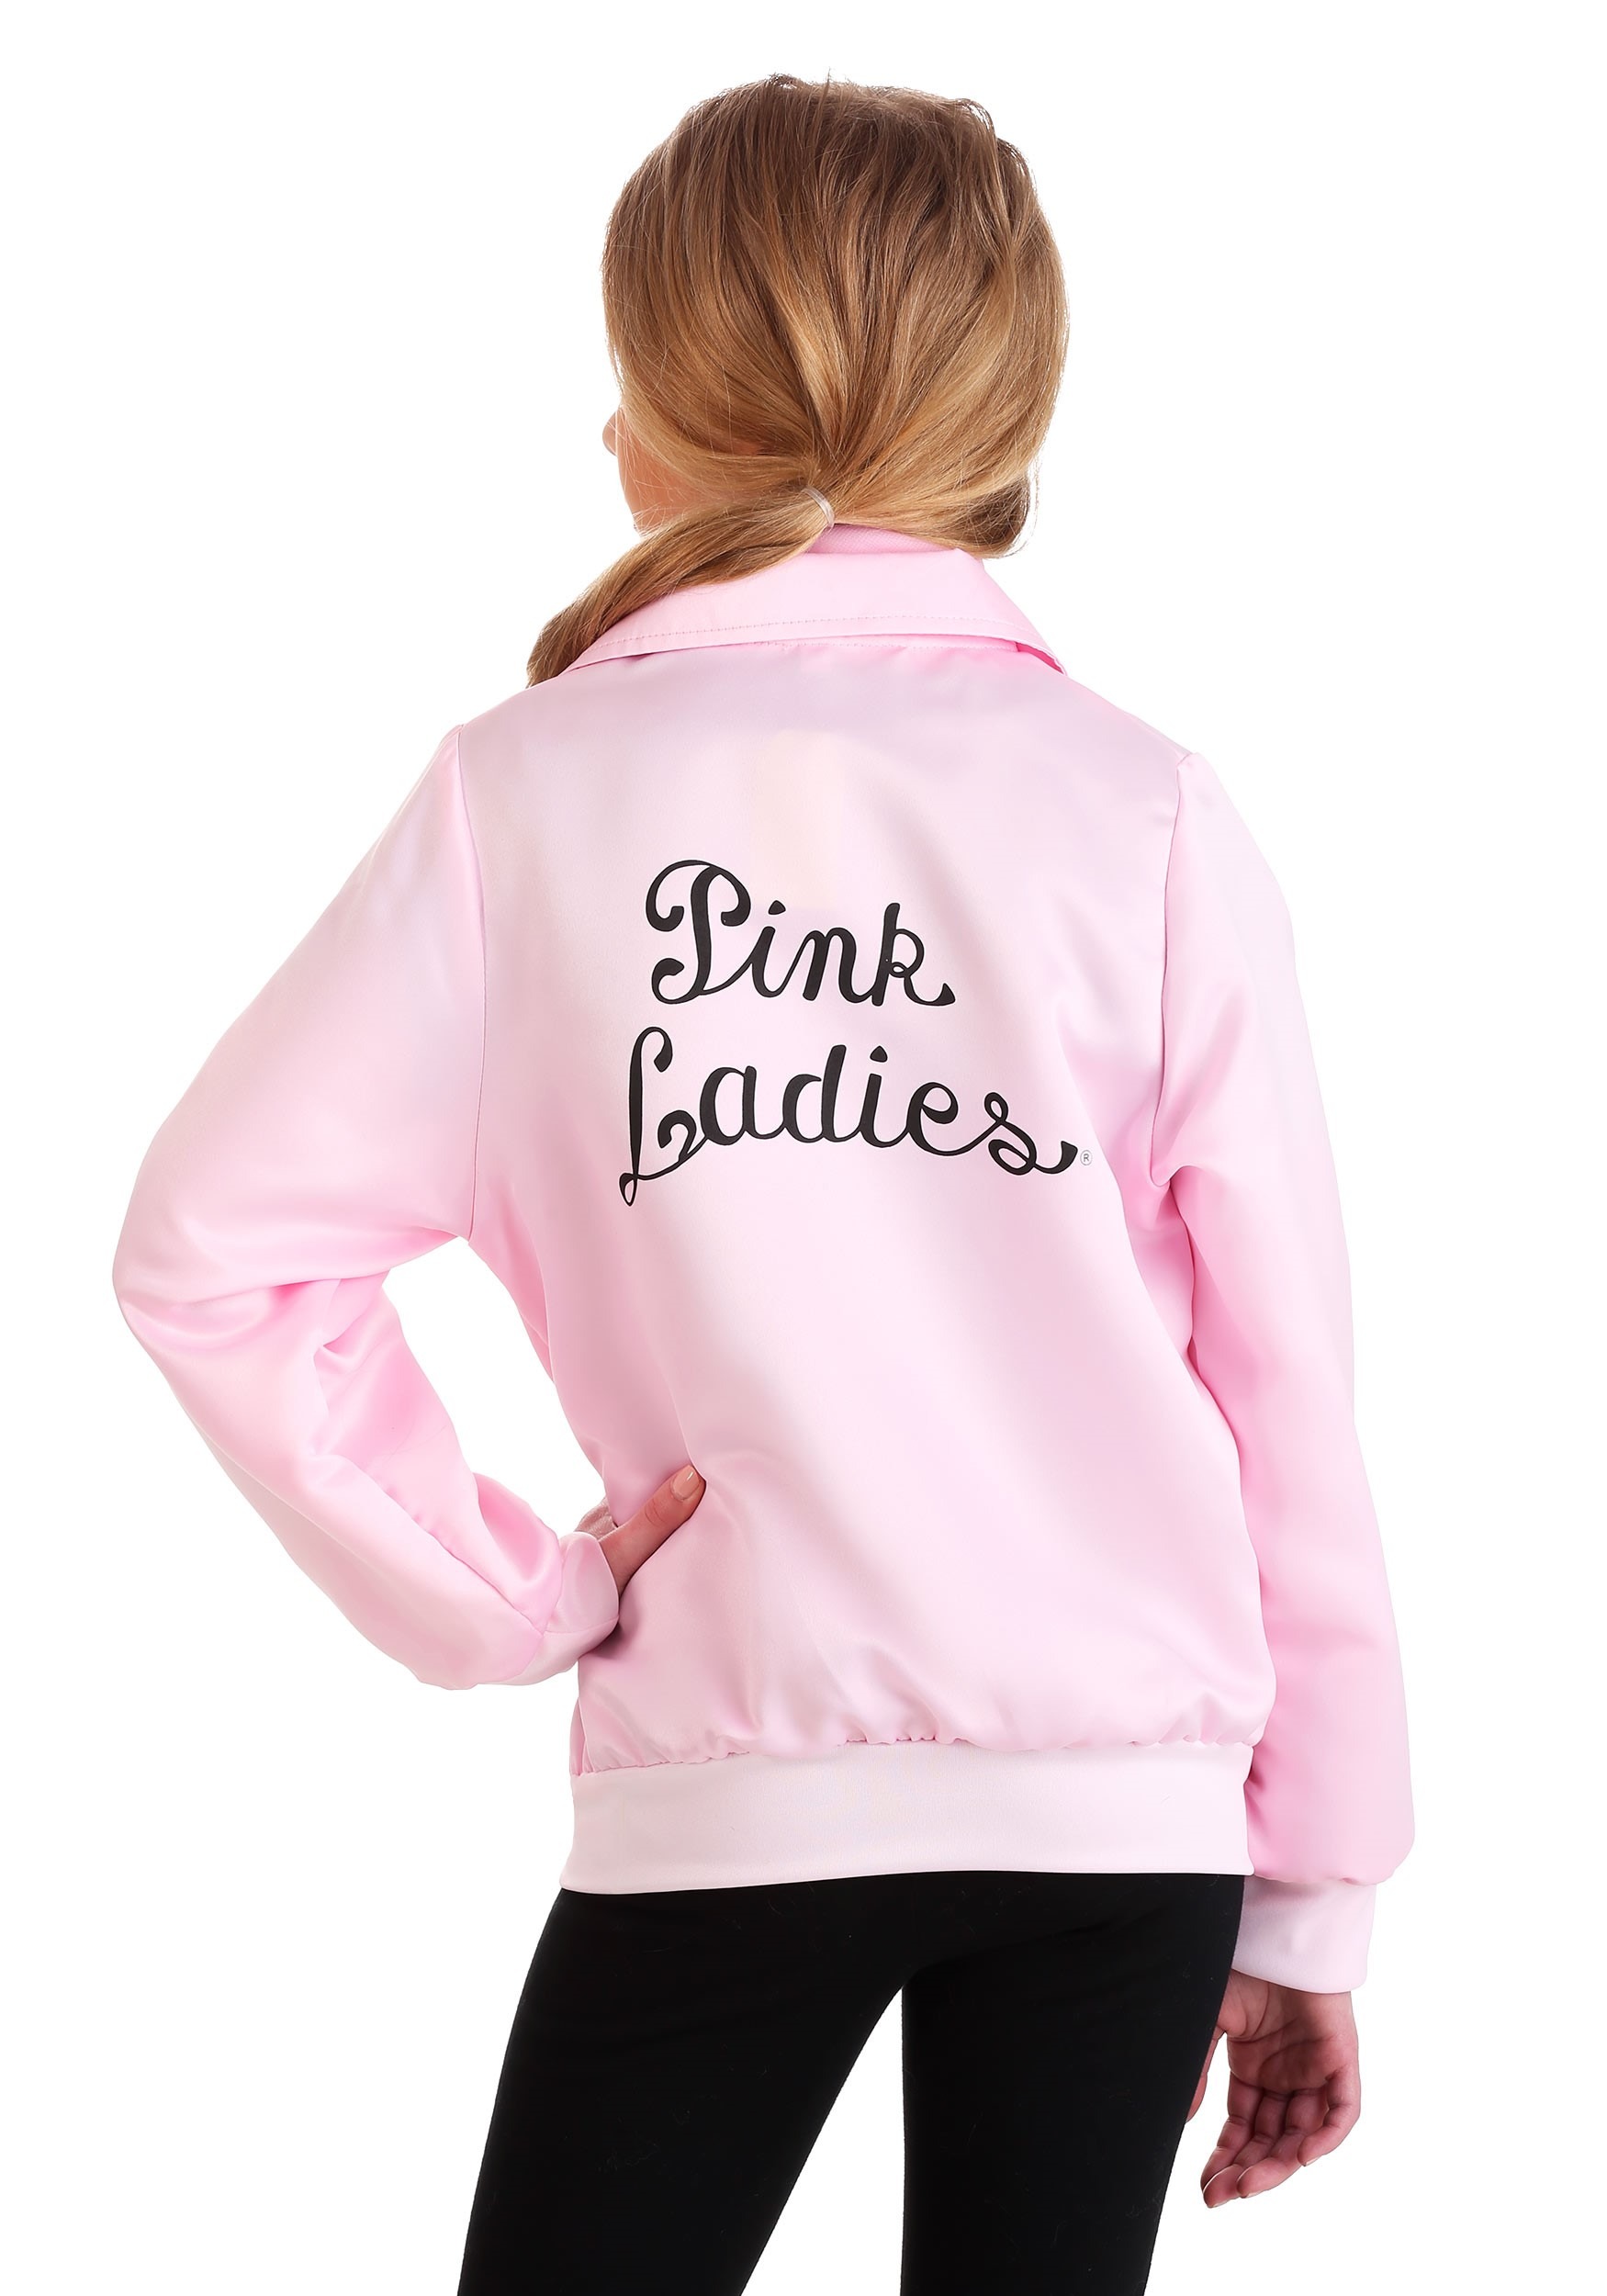 Grease Pink Ladies Costume Jacket for Girls